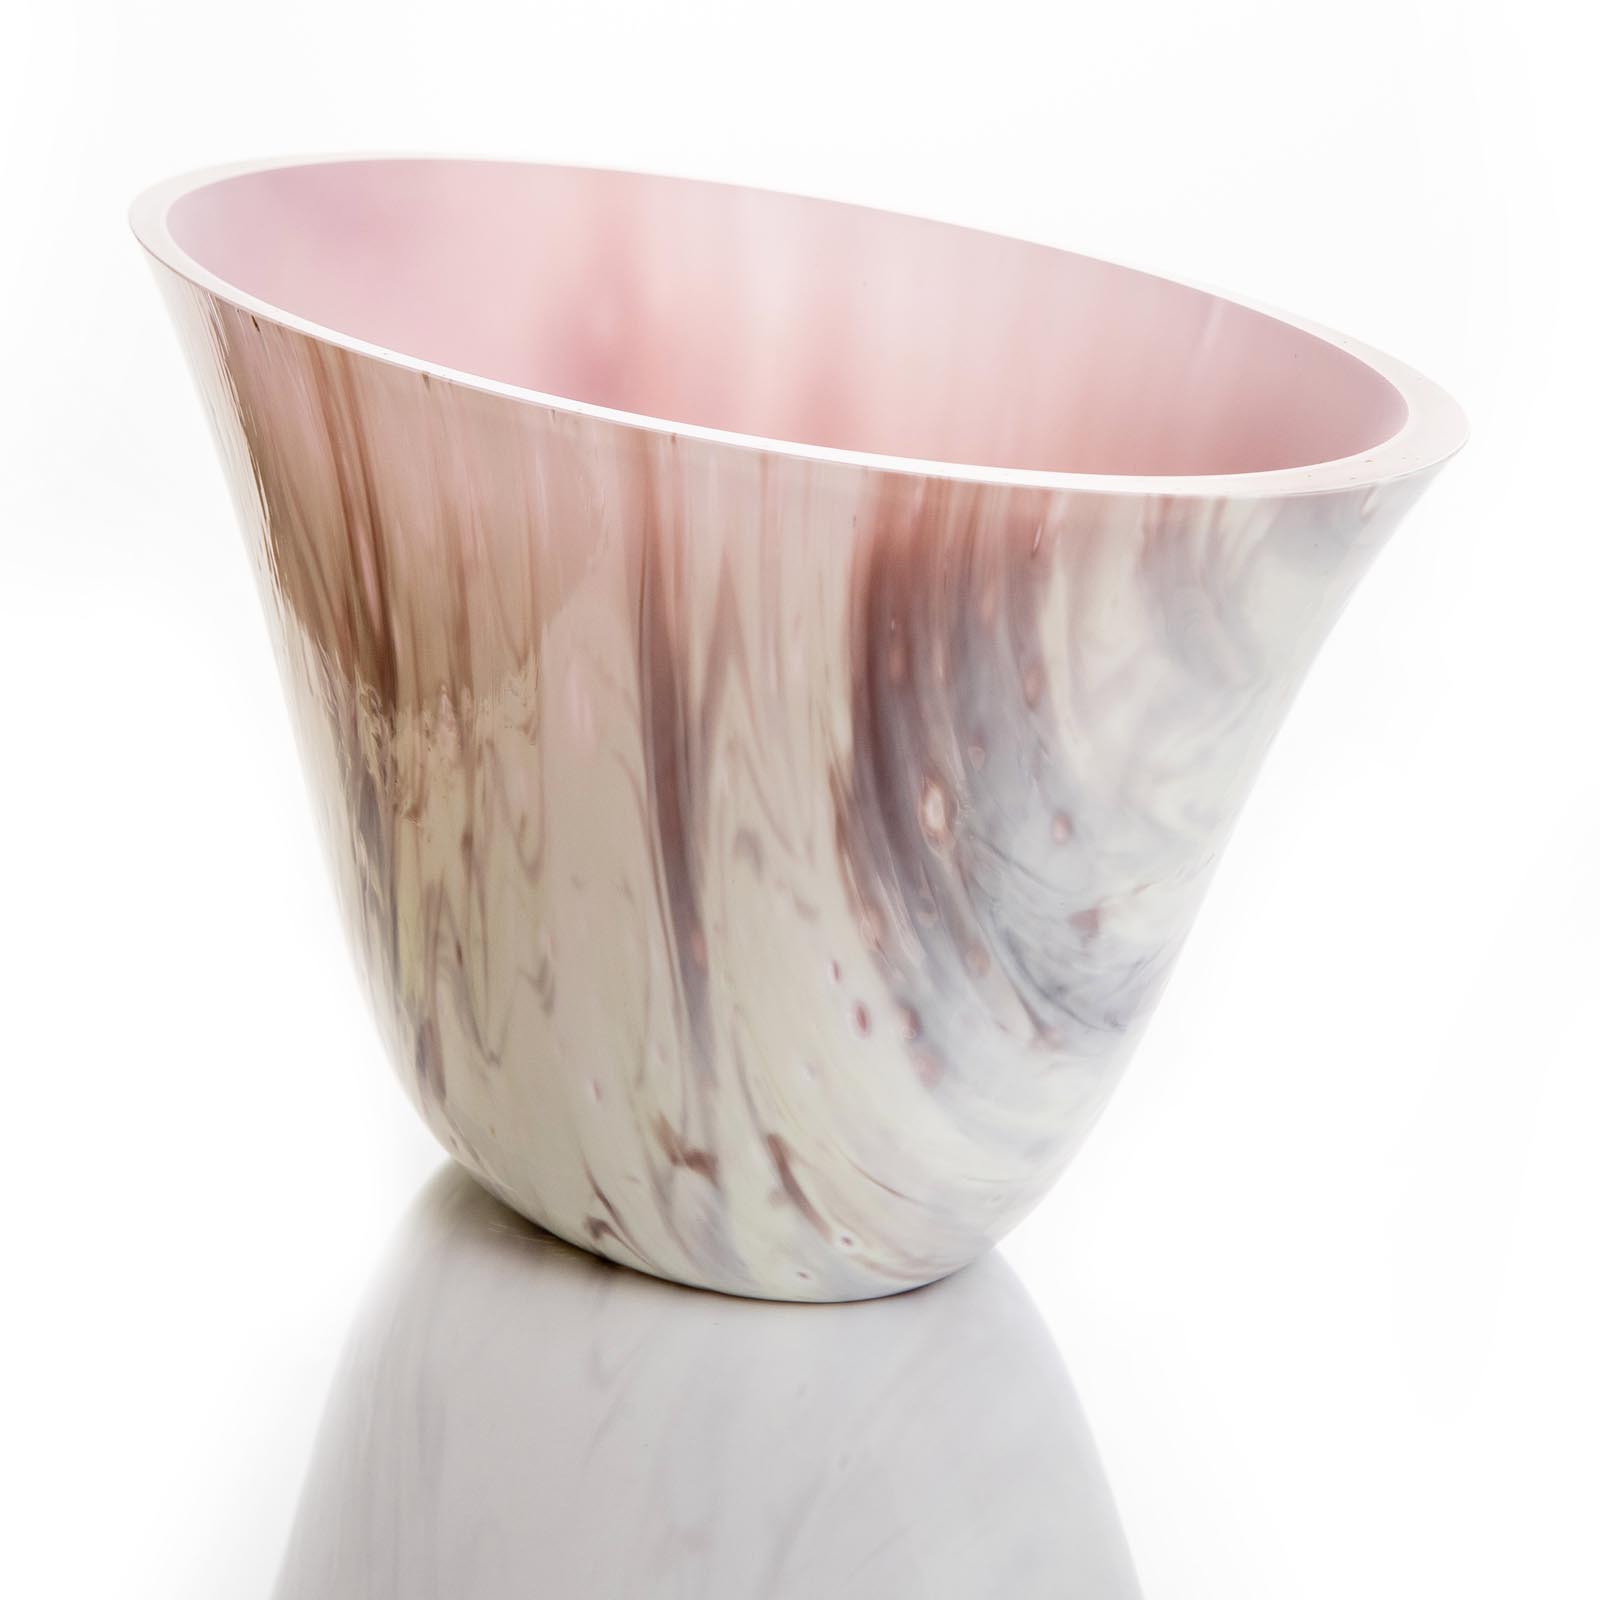 Rosea fluctus streaky white and cranberry pink eclipse glass vessel - contemporary Irish glassware hand made in Ireland by Keith Sheppard Glass Artistry, Northern Ireland